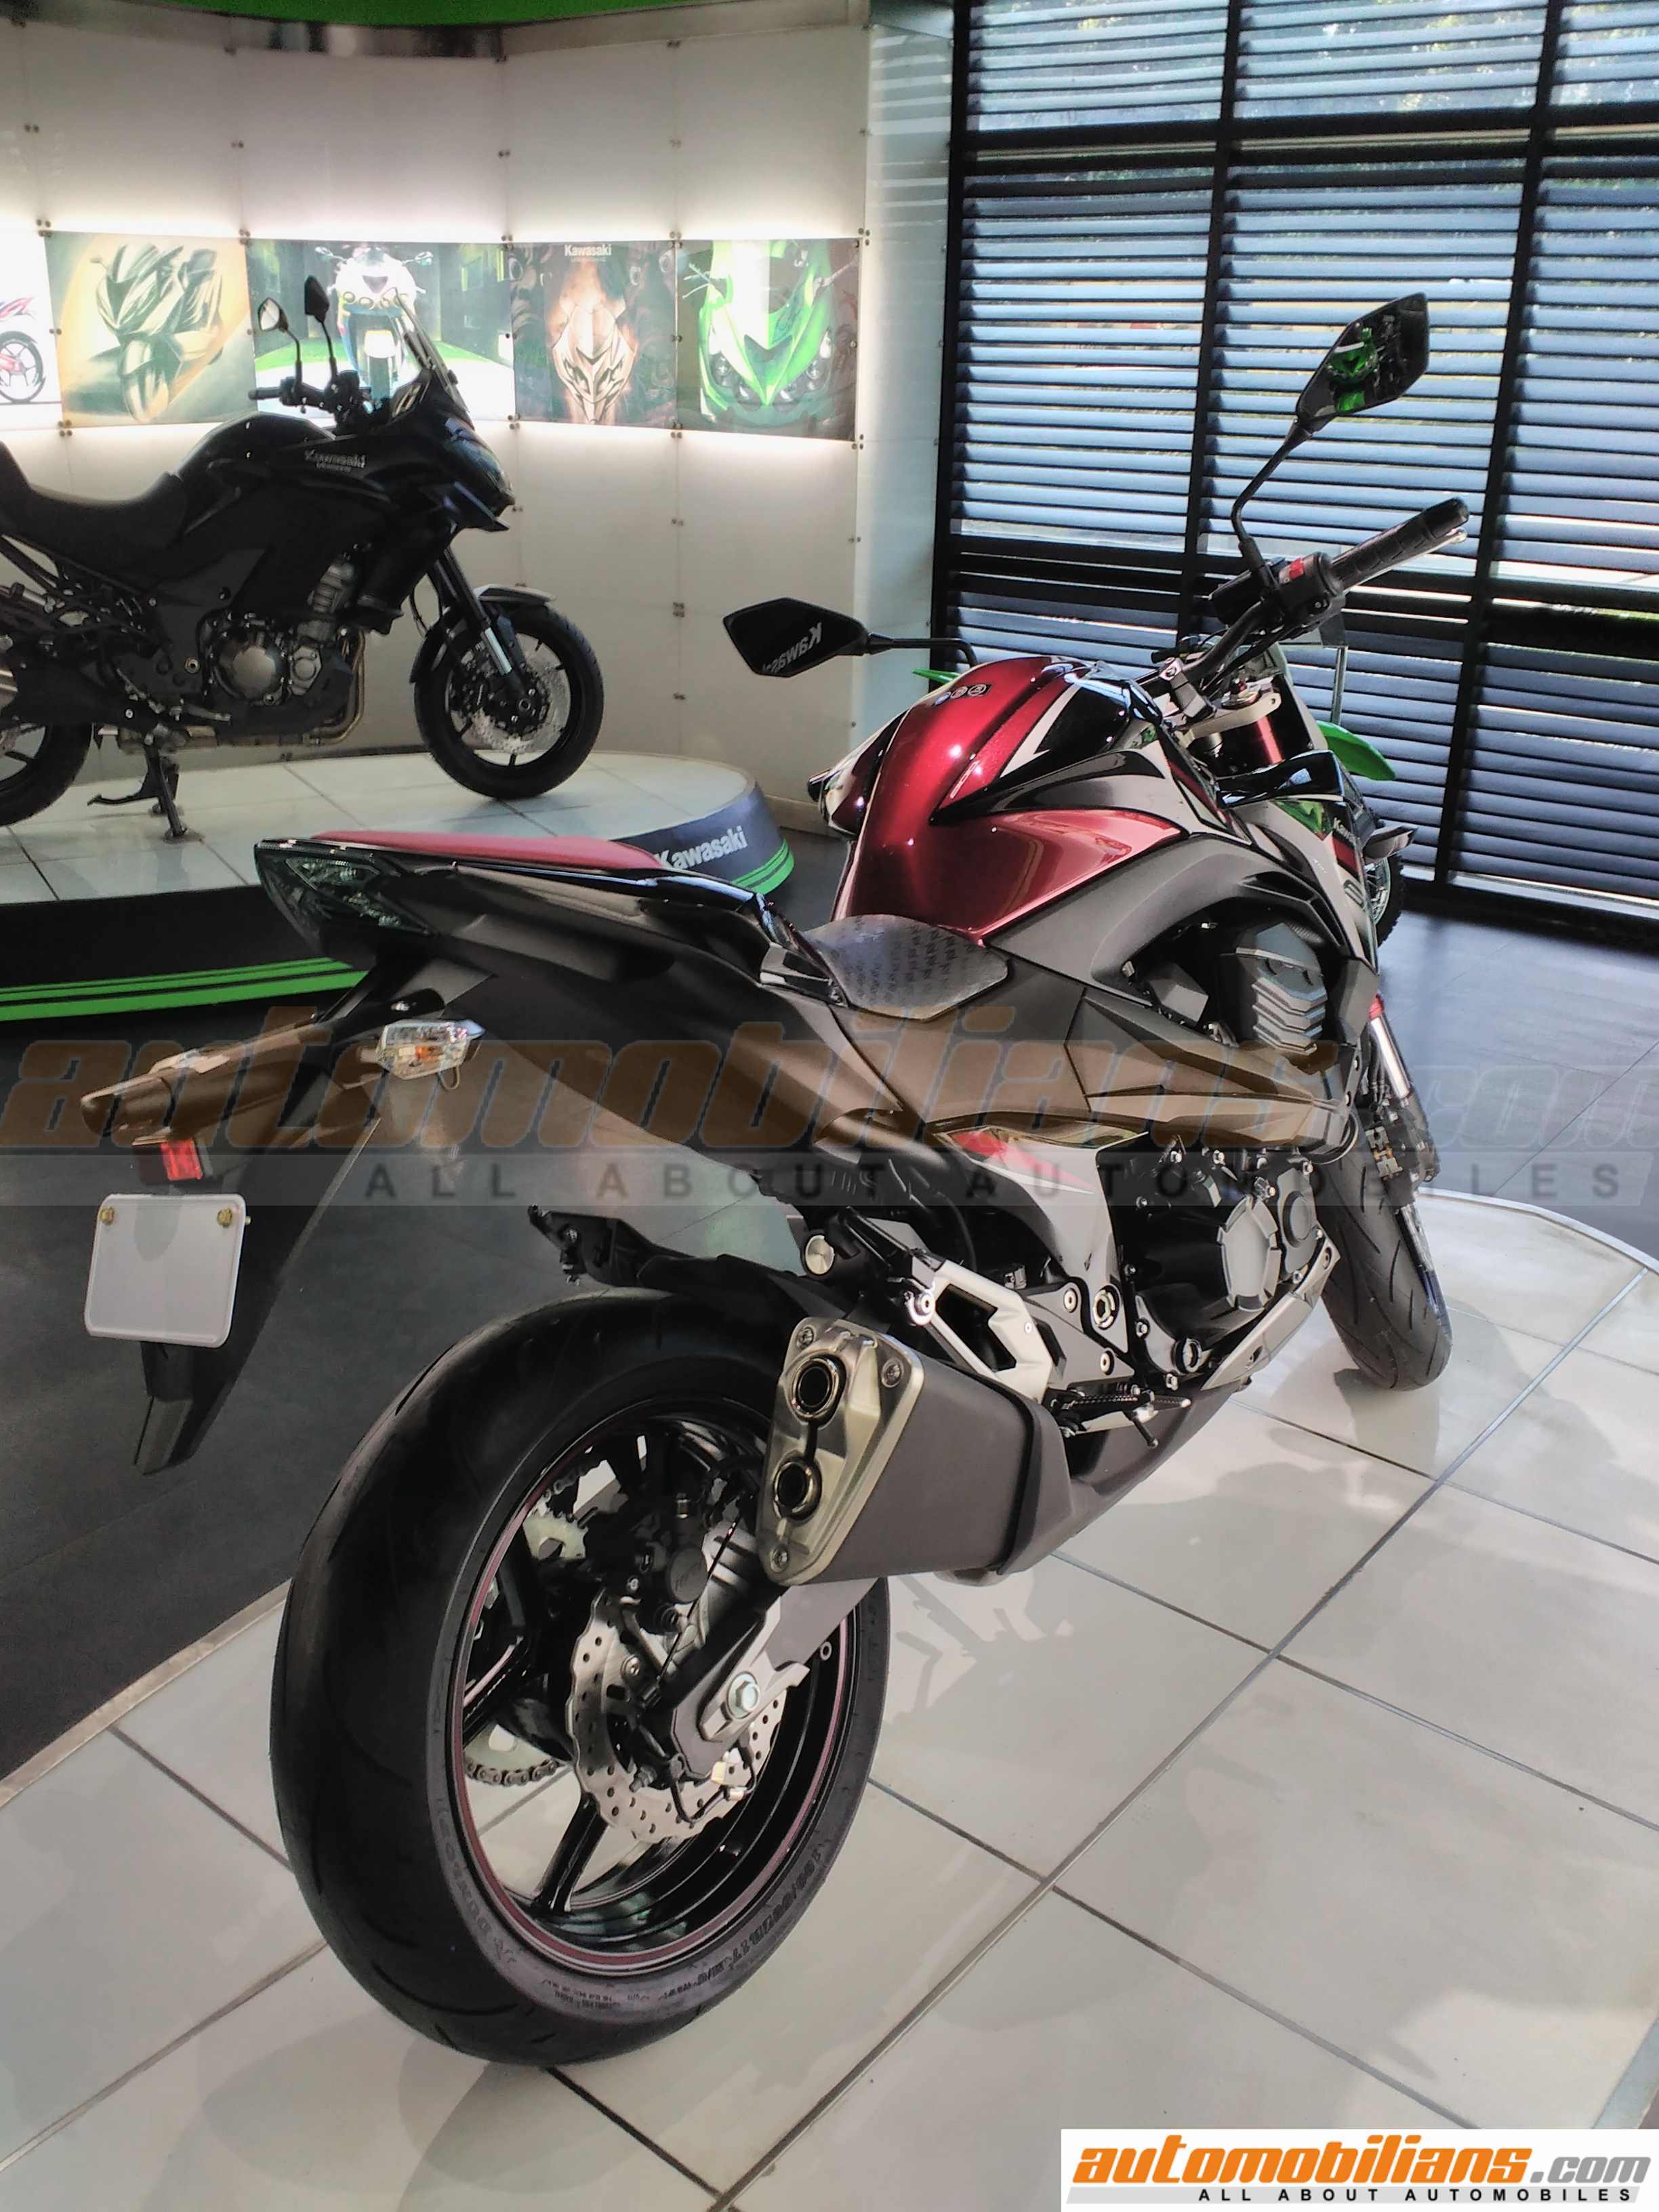 2016 Kawasaki Z800 ABS Gets A New Red Color, Arrives At Dealerships